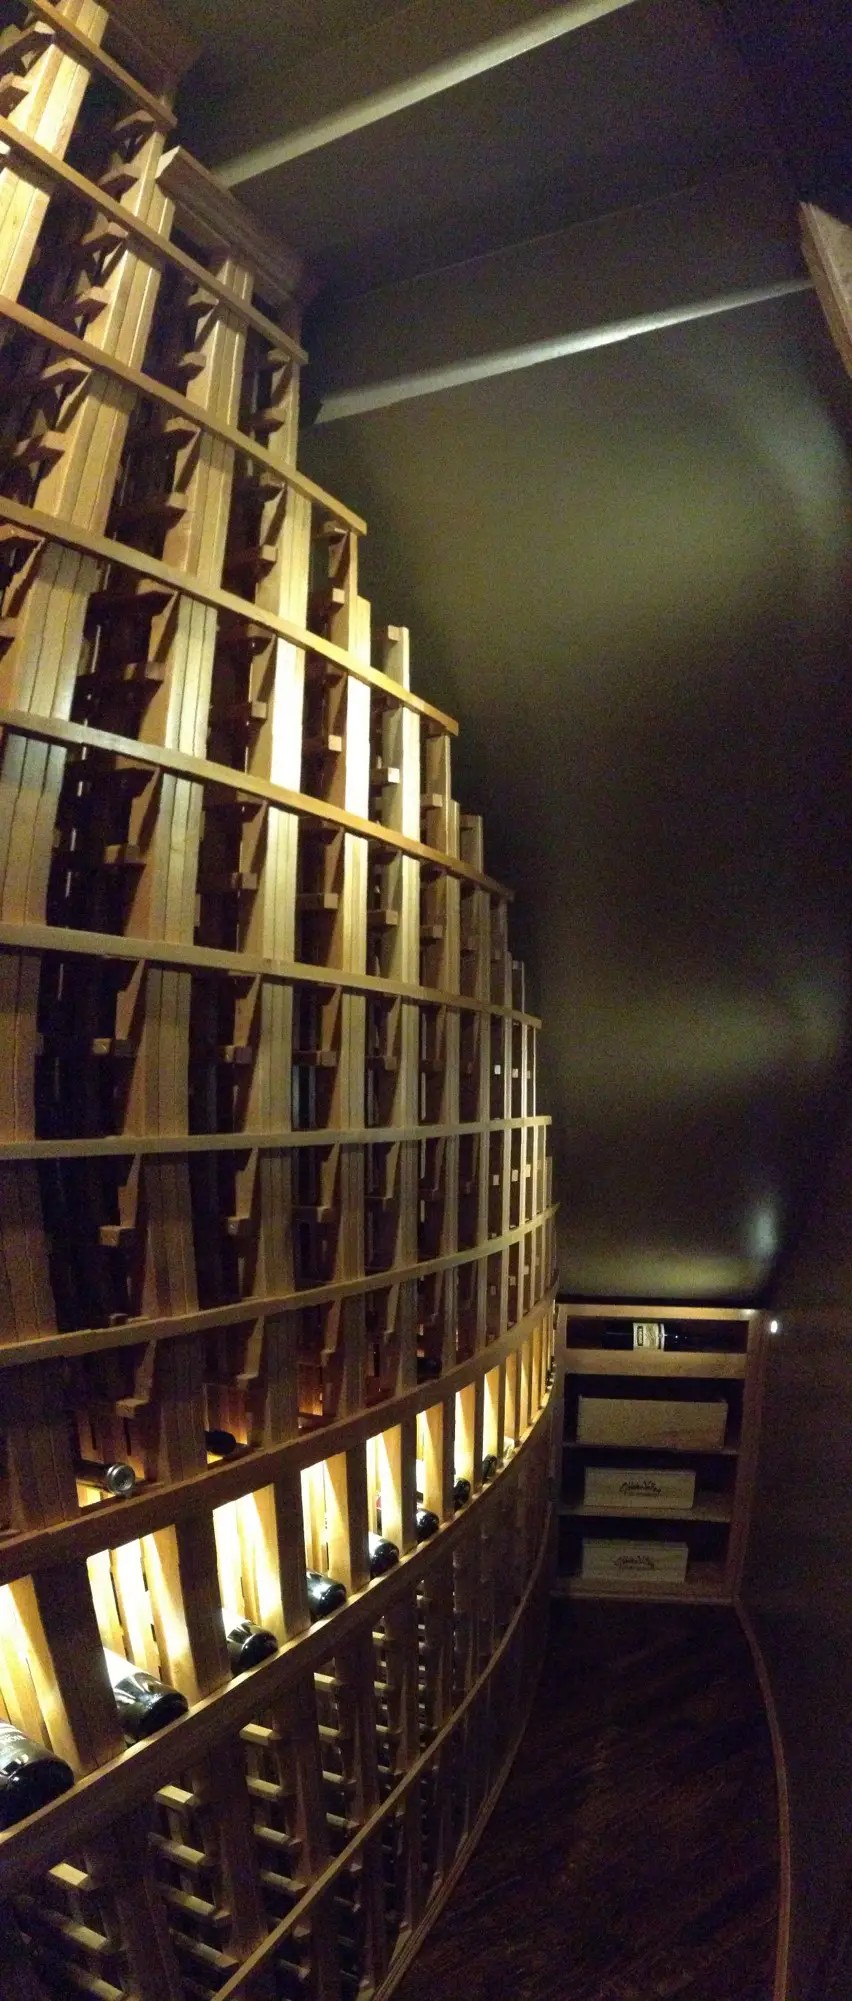 23. The Texas Trophy Residential Wine Cellar Project